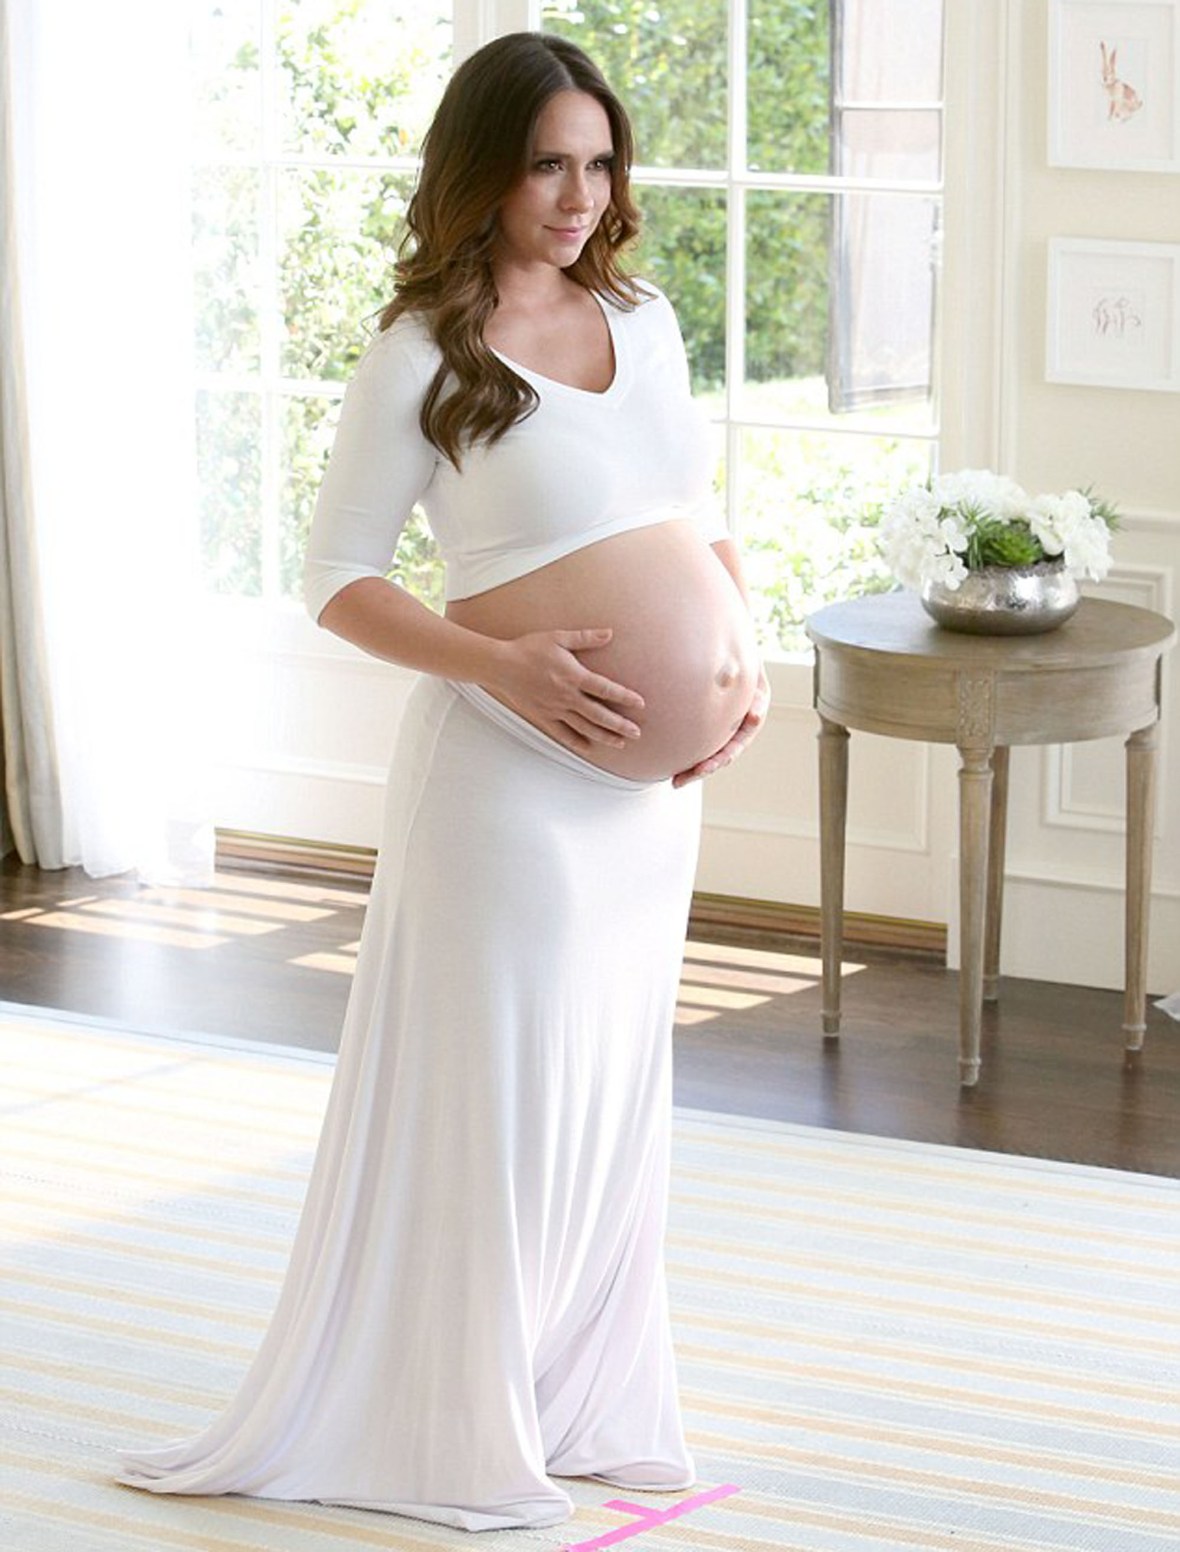 Pregnant Jennifer Love Hewitt Bares Her Baby Bump in New Ad Campaign